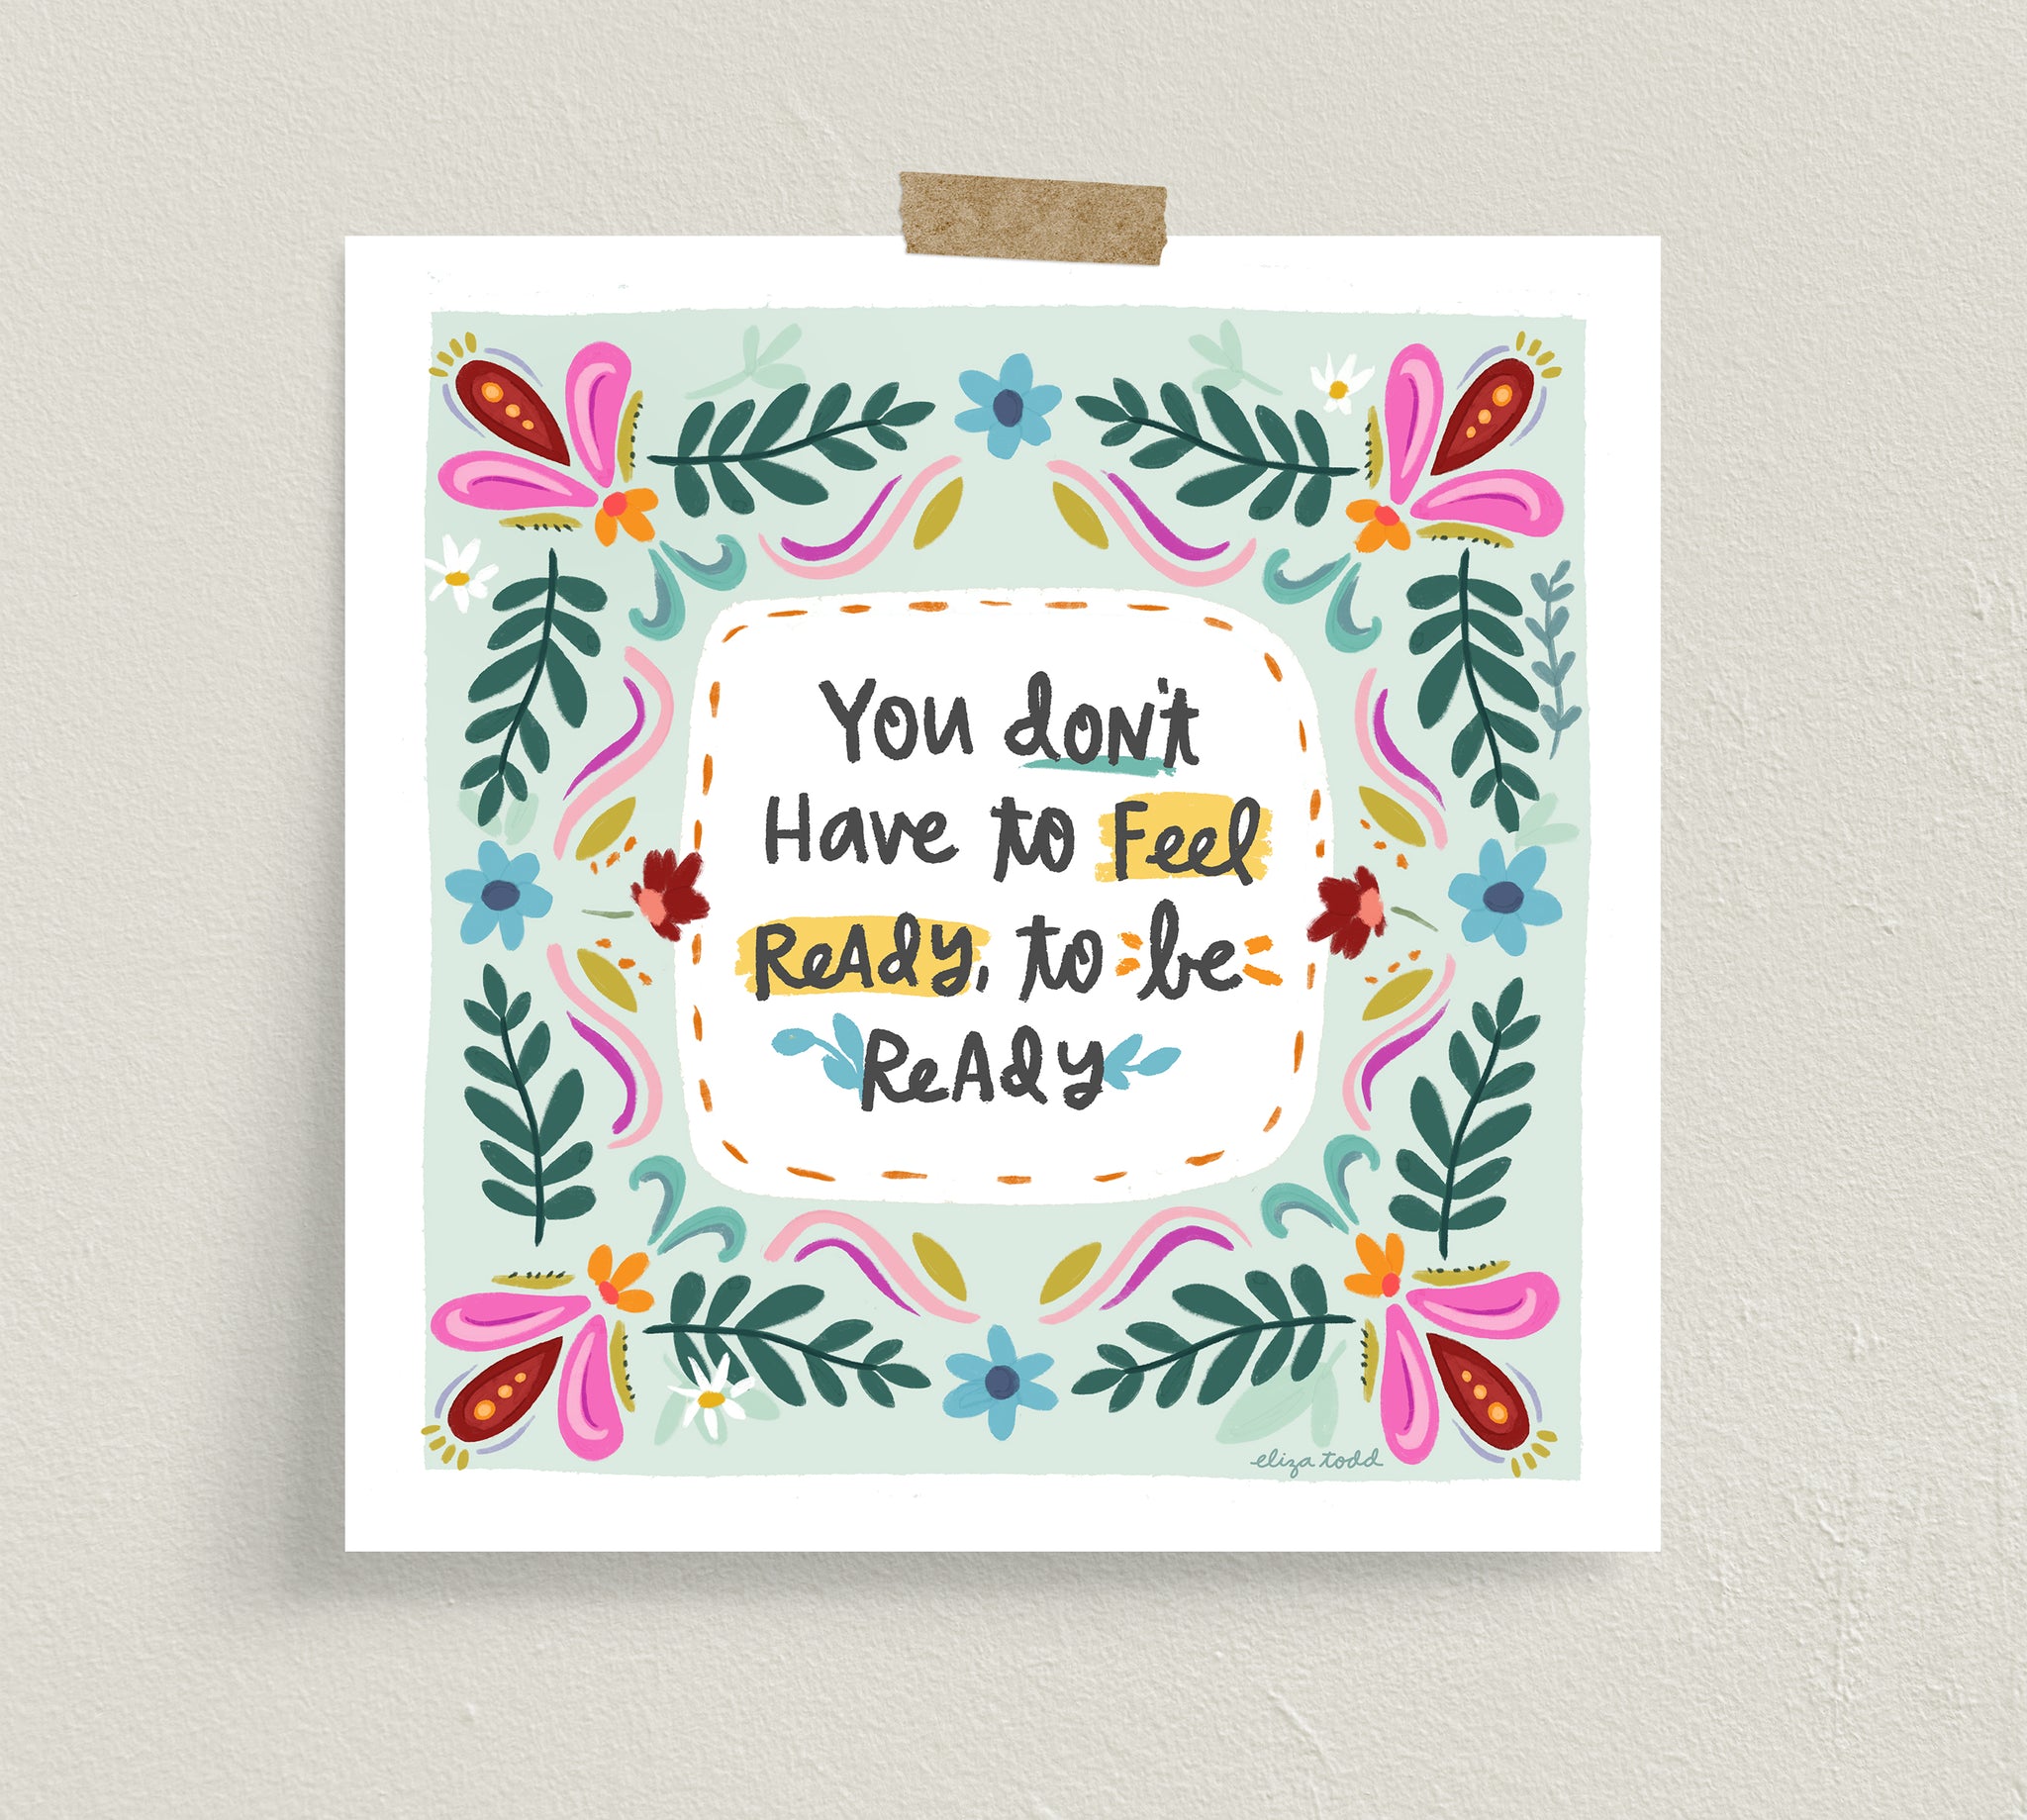 Fine art prints by Eliza Todd featuring paisleys and florals saying "You don't have to feel ready to be ready." - APeaceofWerk.com